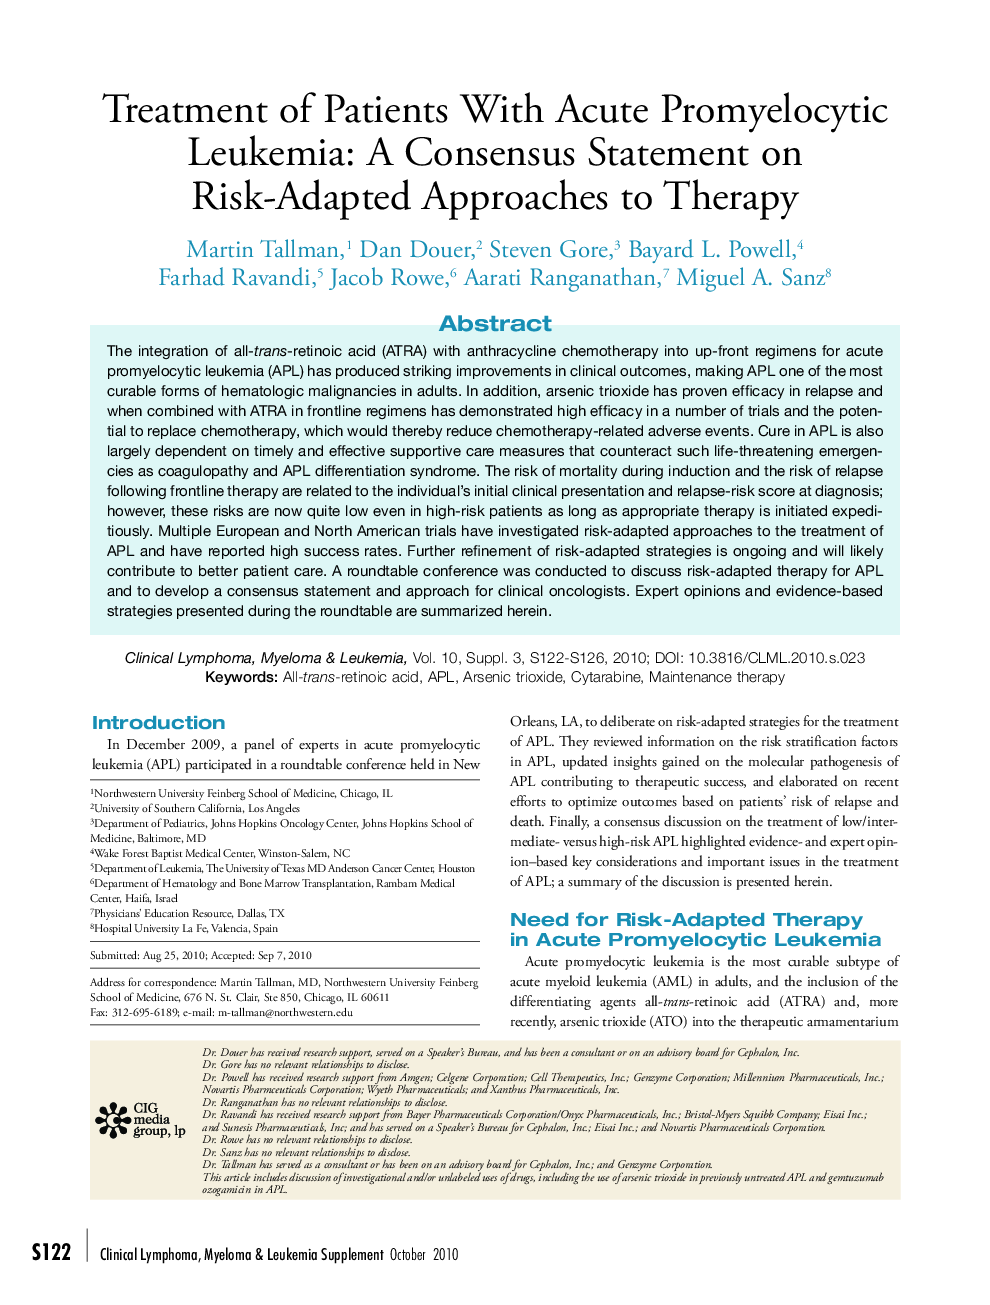 Treatment of Patients With Acute Promyelocytic Leukemia: A Consensus Statement on Risk-Adapted Approaches to Therapy 